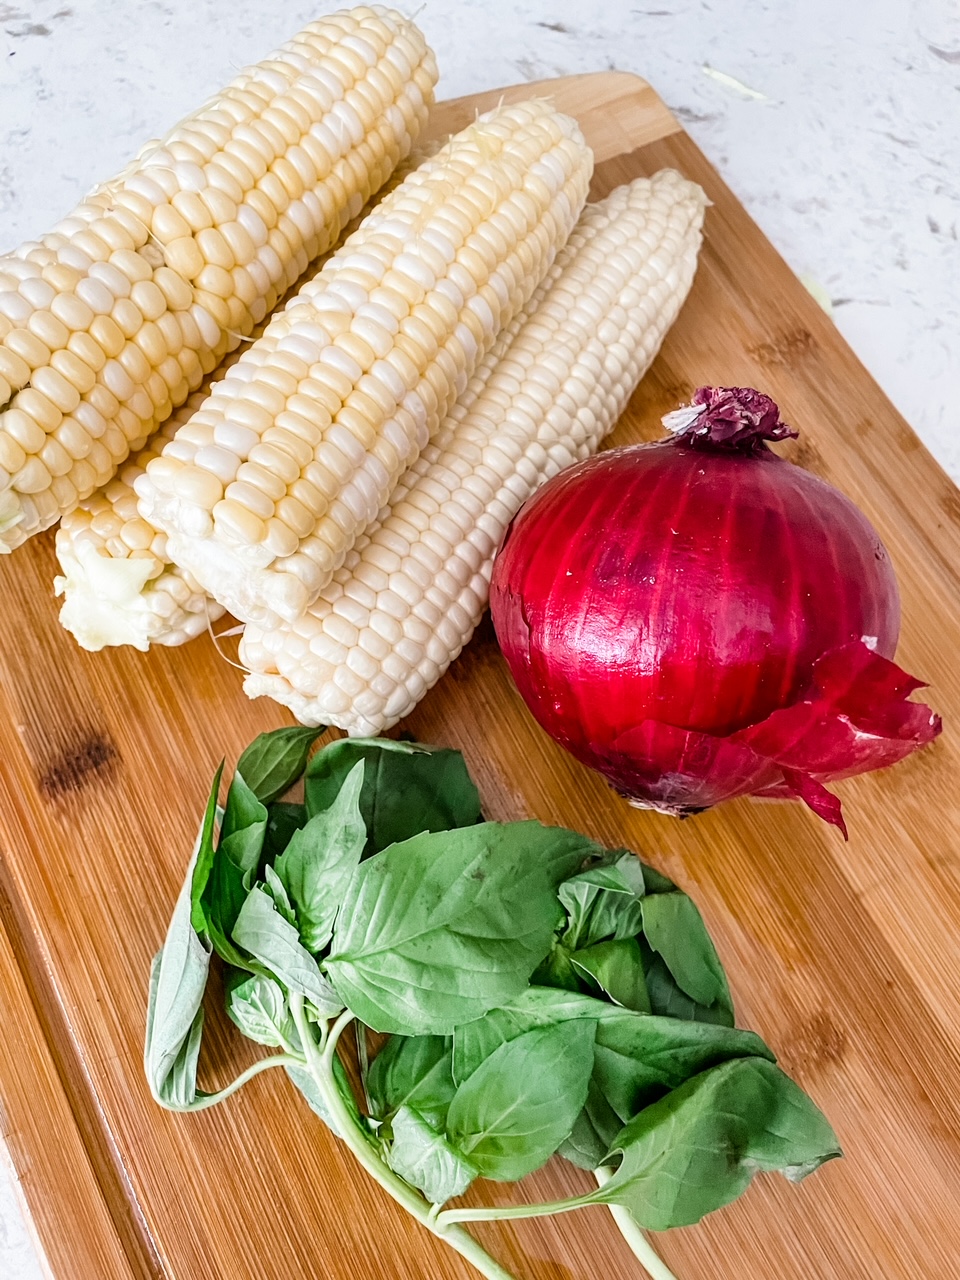 A few of the ingredients for Barefoot Contessa’s BEST Corn and Basil Salad - red onion, corn and basil